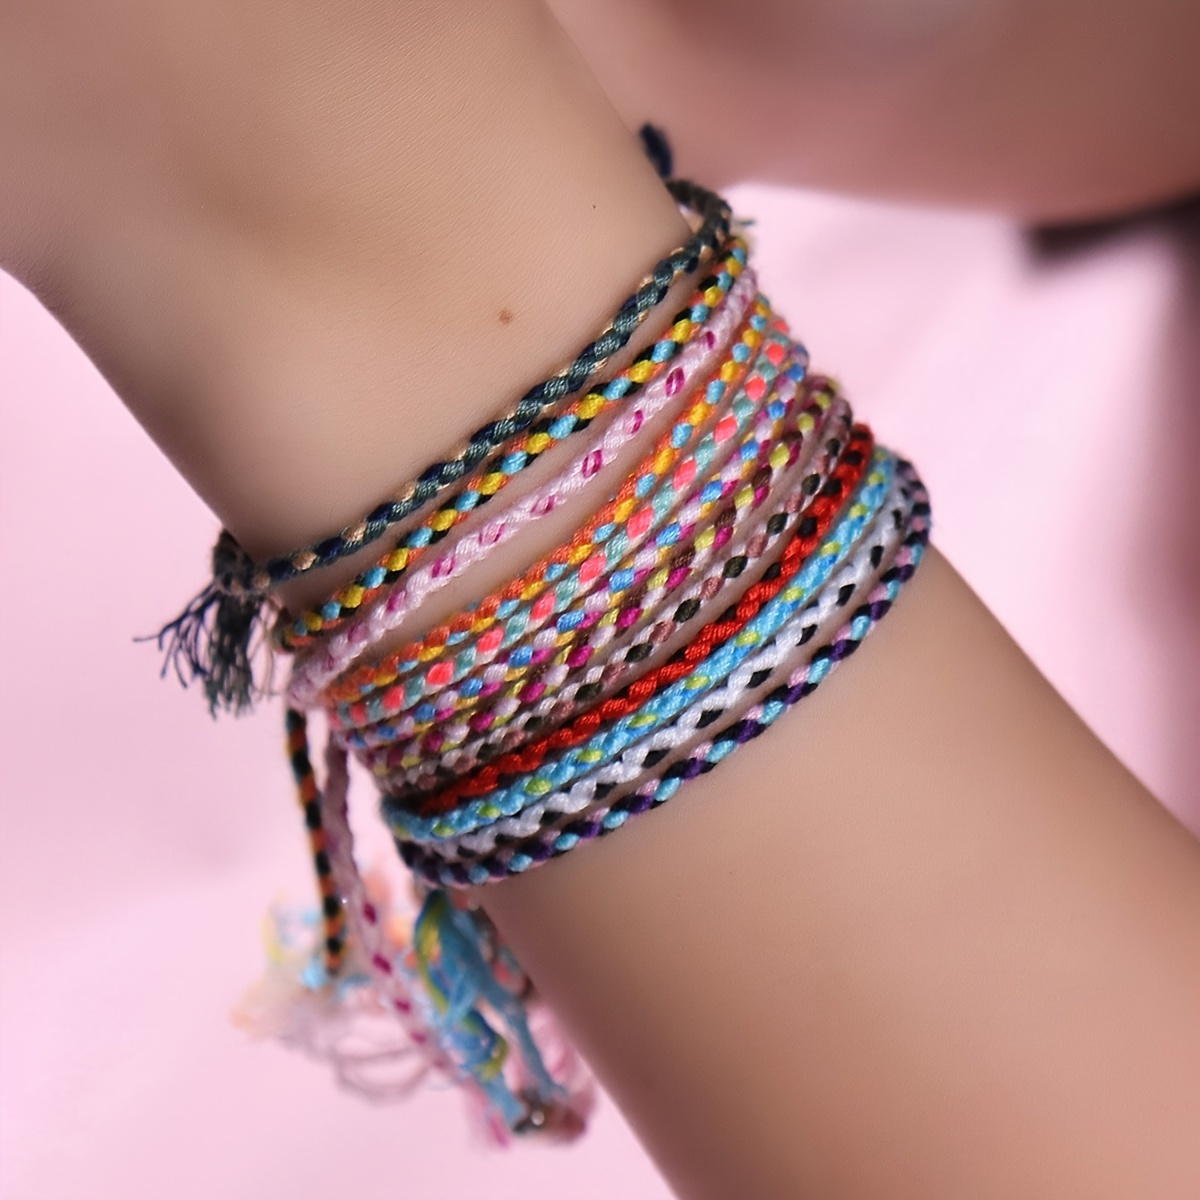 

12pcs Colorful Braided Bracelets Set Adjustable Boho Style Bracelet Set Charms Jewelry Gifts For Teen Daughter Sister Best Friend Friendship Her